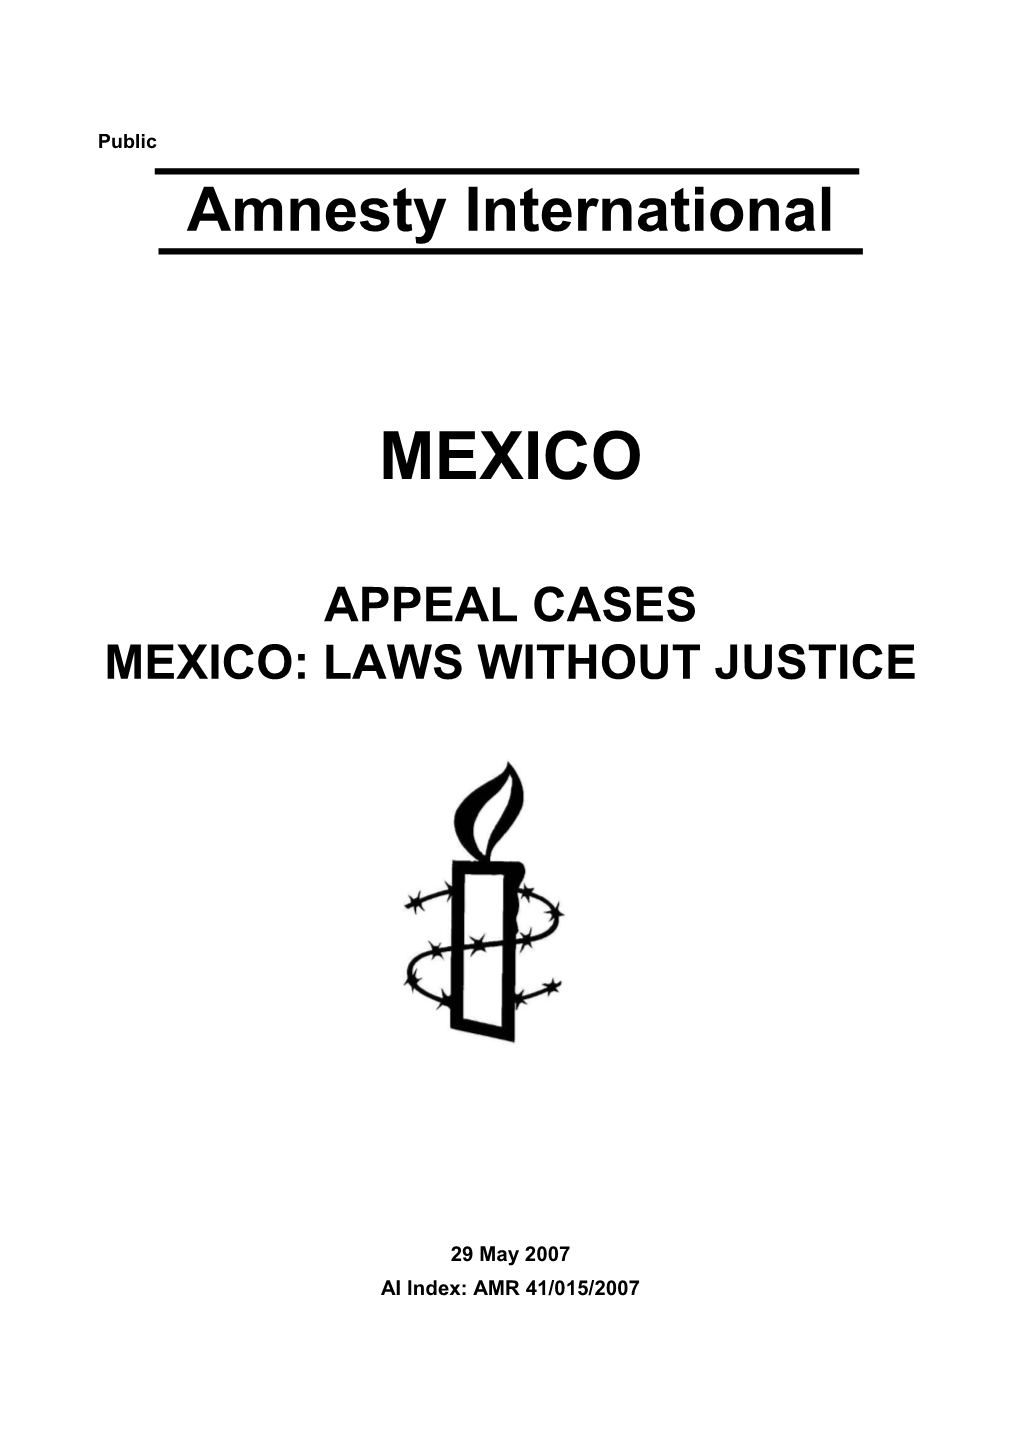 Laws Without Justice: Appeal Cases